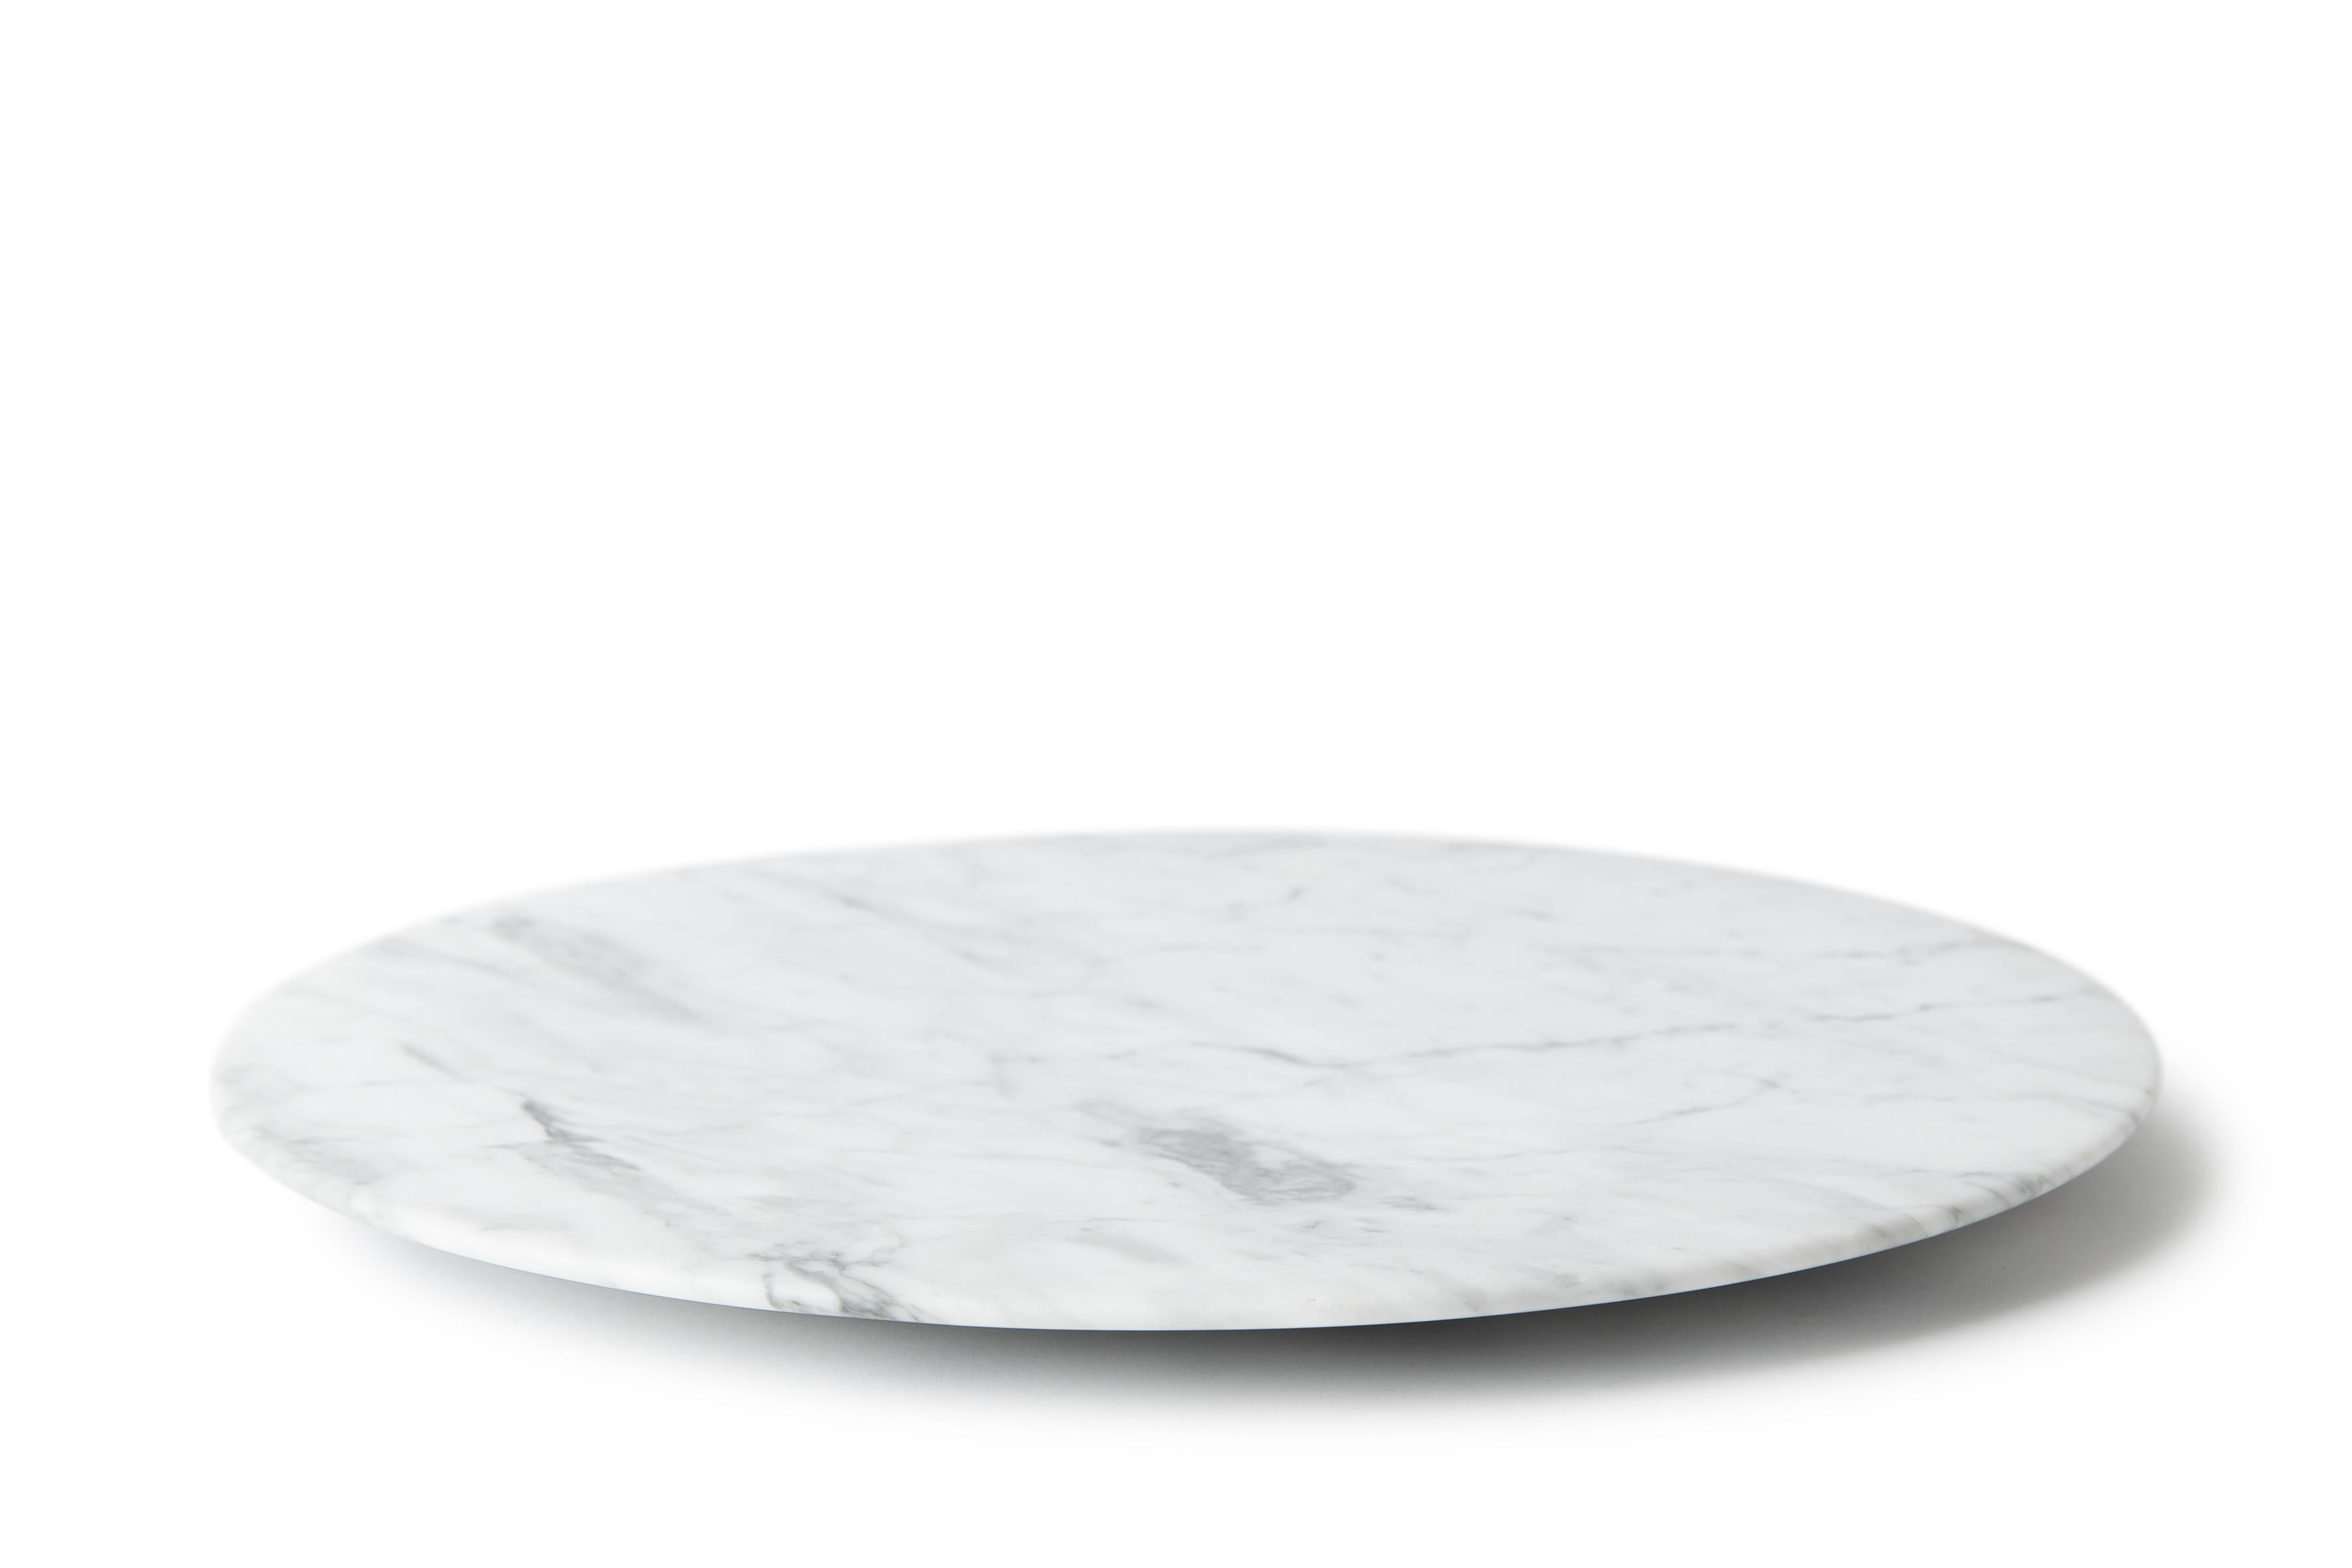 This stunning tray, made from White Carrara marble, evokes the Renaissance concept of man being at the centre of space and nature with its circular shape. The circle is rich in symbolism in European history and art. The fusion of these two elements